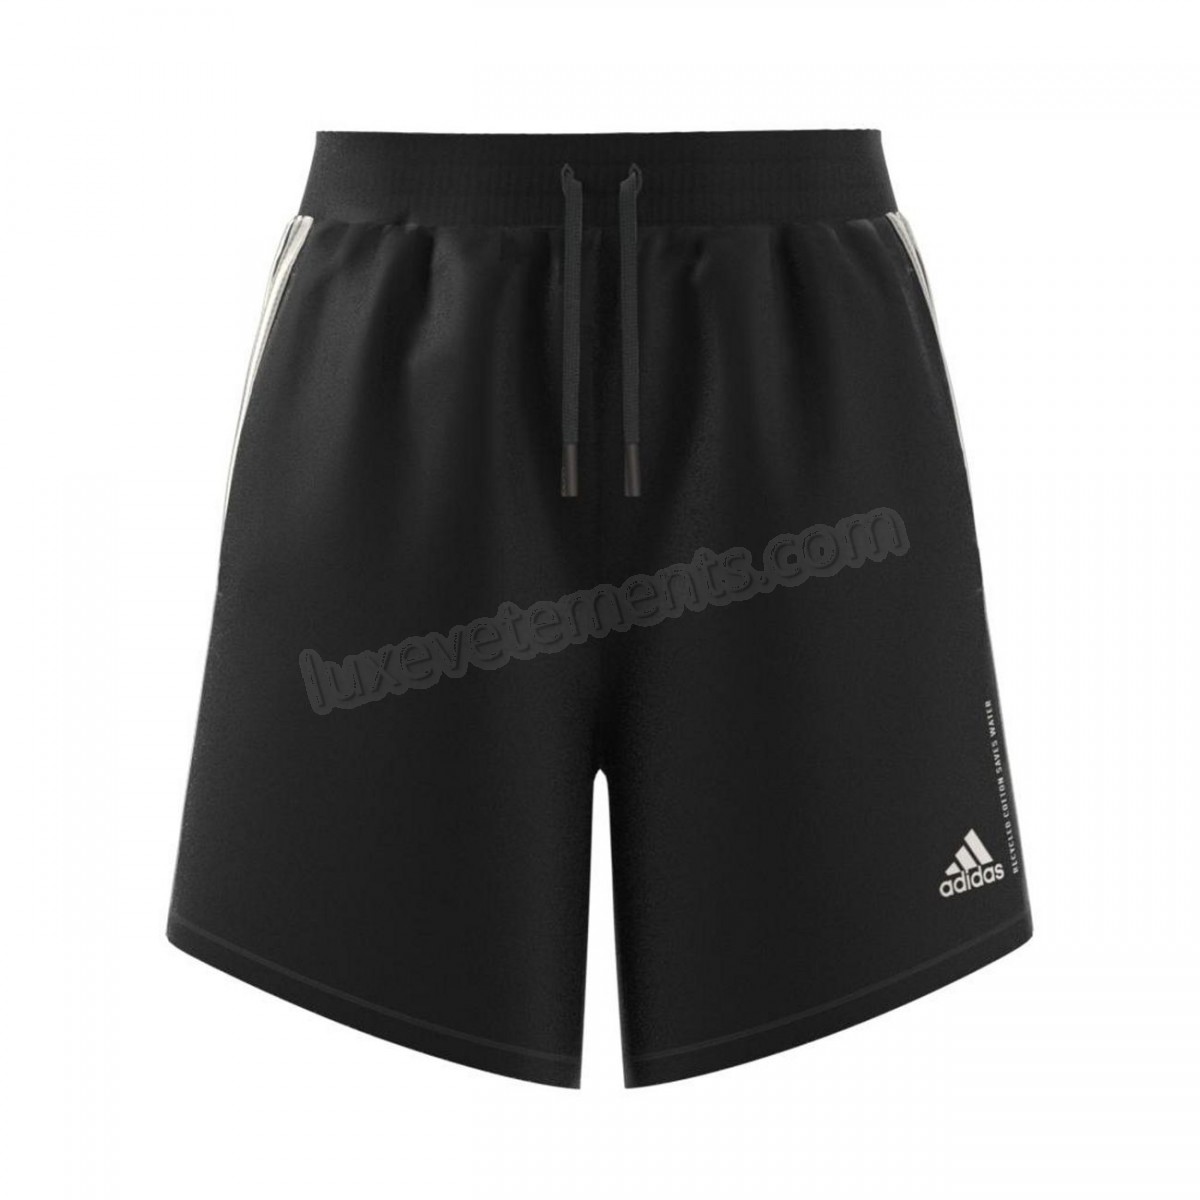 Adidas-Fitness femme ADIDAS Short femme adidas Must Haves Recycled Cotton Vente en ligne - -8